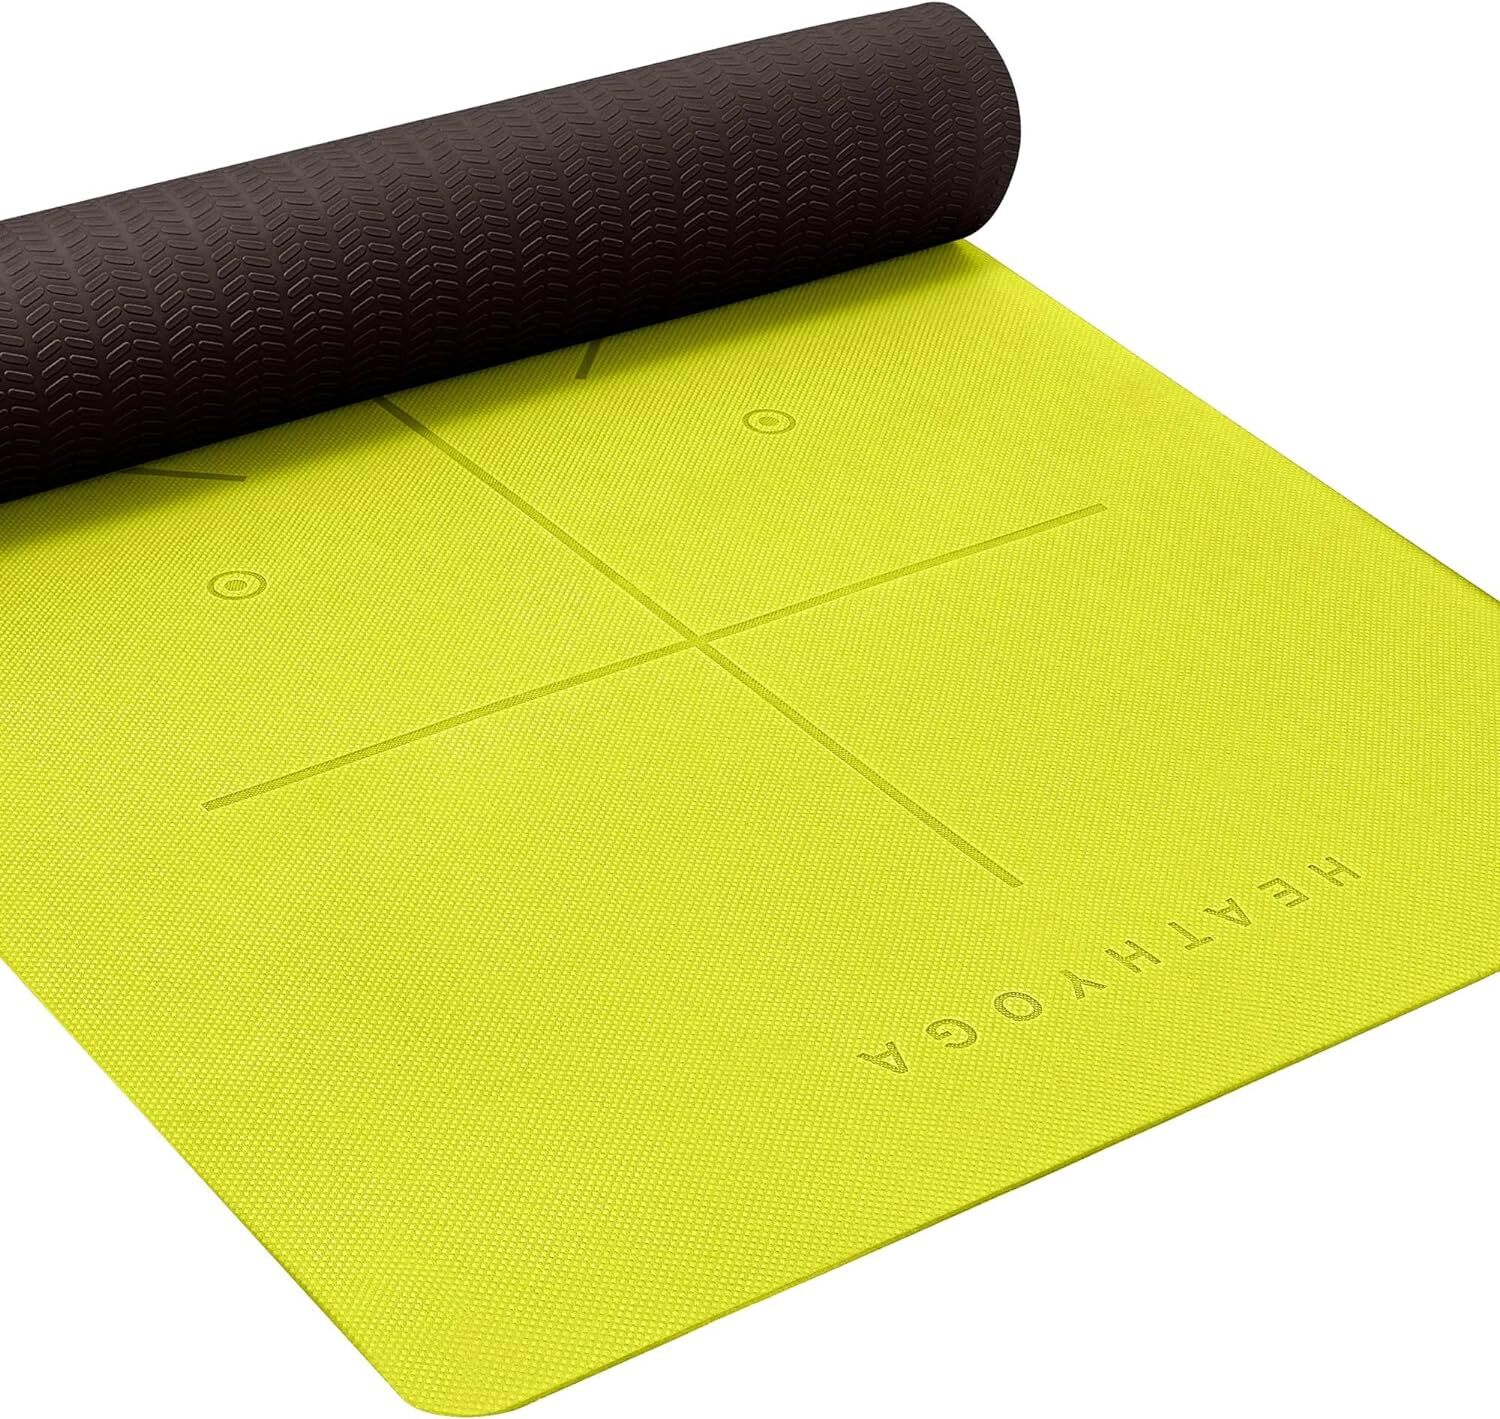 Heathyoga Eco Friendly Non Slip Yoga Mat, Body Alignment System, SGS  Certified TPE Material - Textured Non Slip Surface 